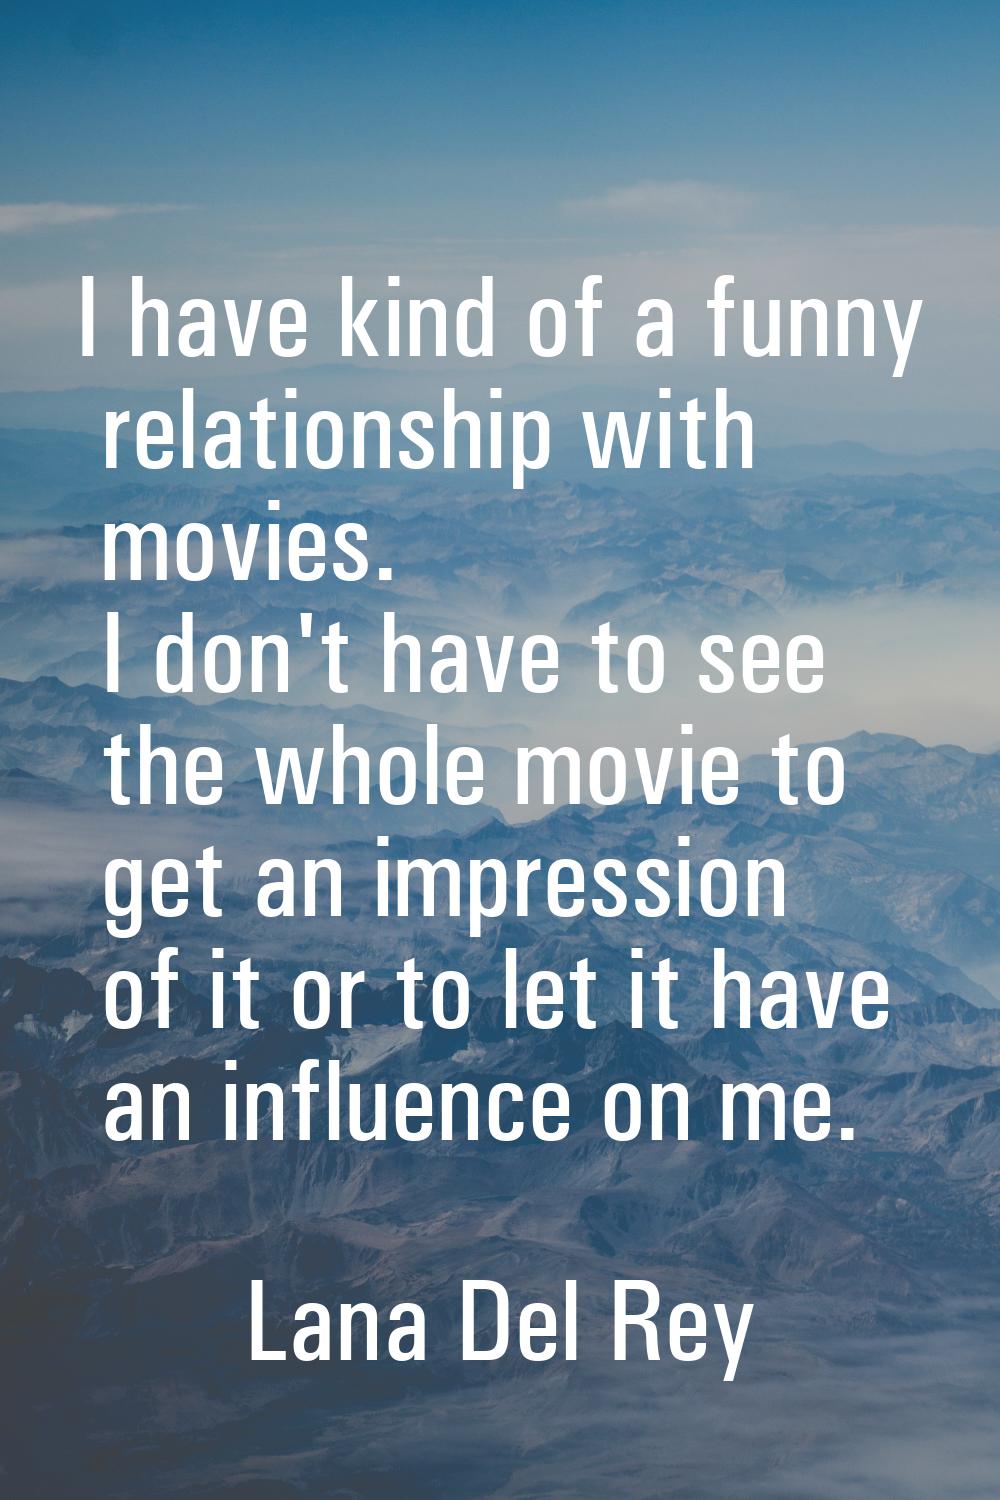 I have kind of a funny relationship with movies. I don't have to see the whole movie to get an impr